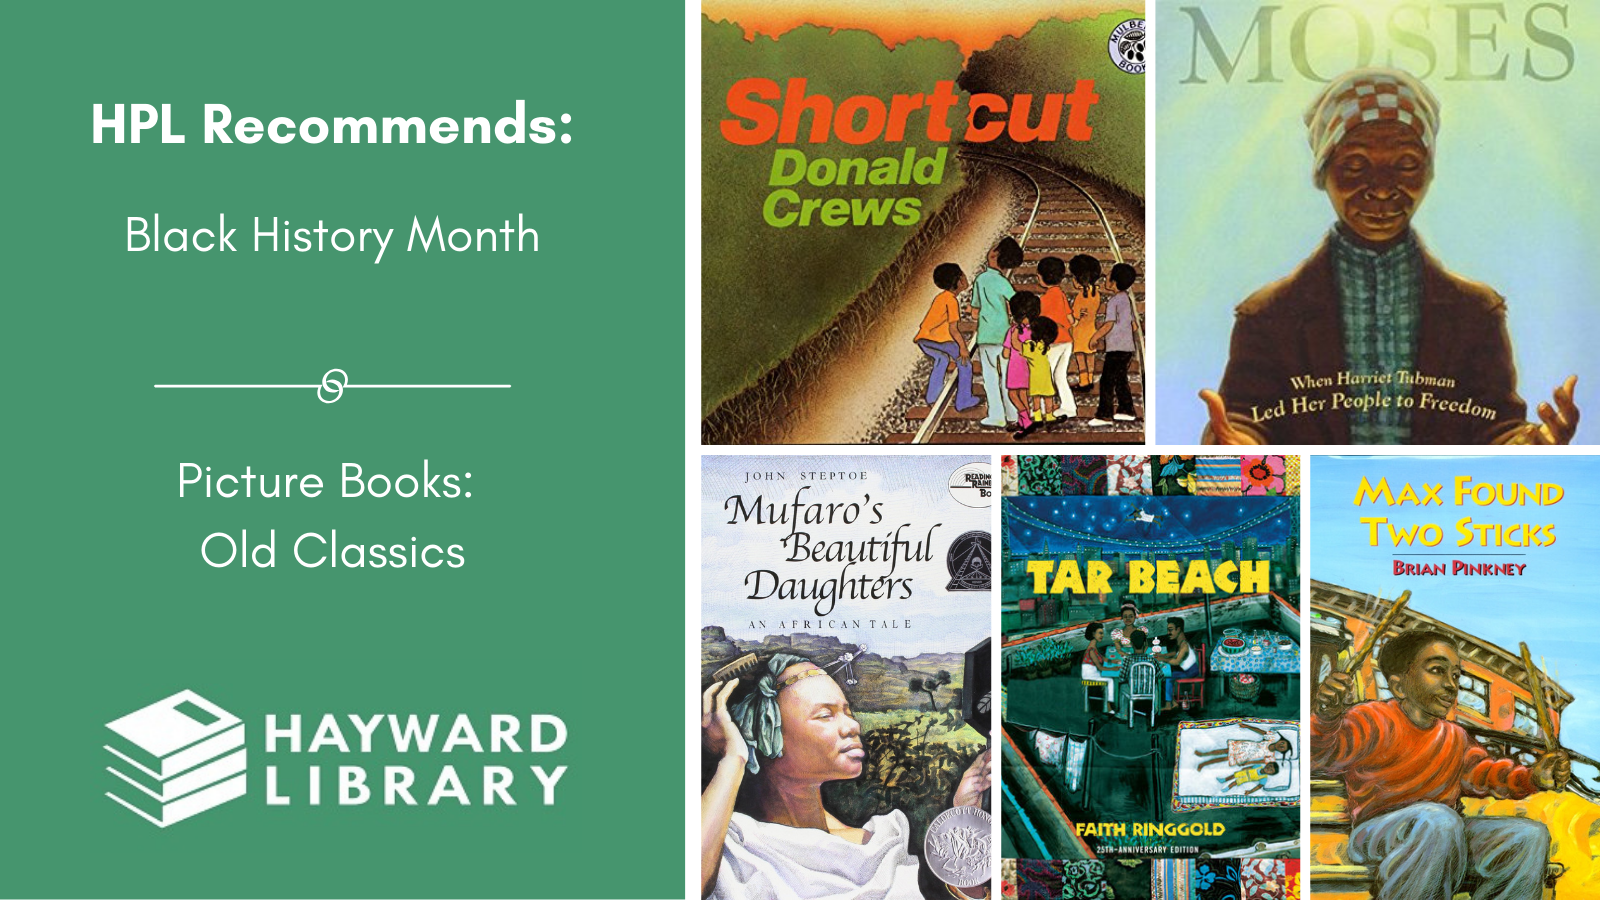 Collage of book covers with a green block on left side that says HPL Recommends, Black History Month, Picture Books: Old Classics in white text, with Hayward Library logo below it.